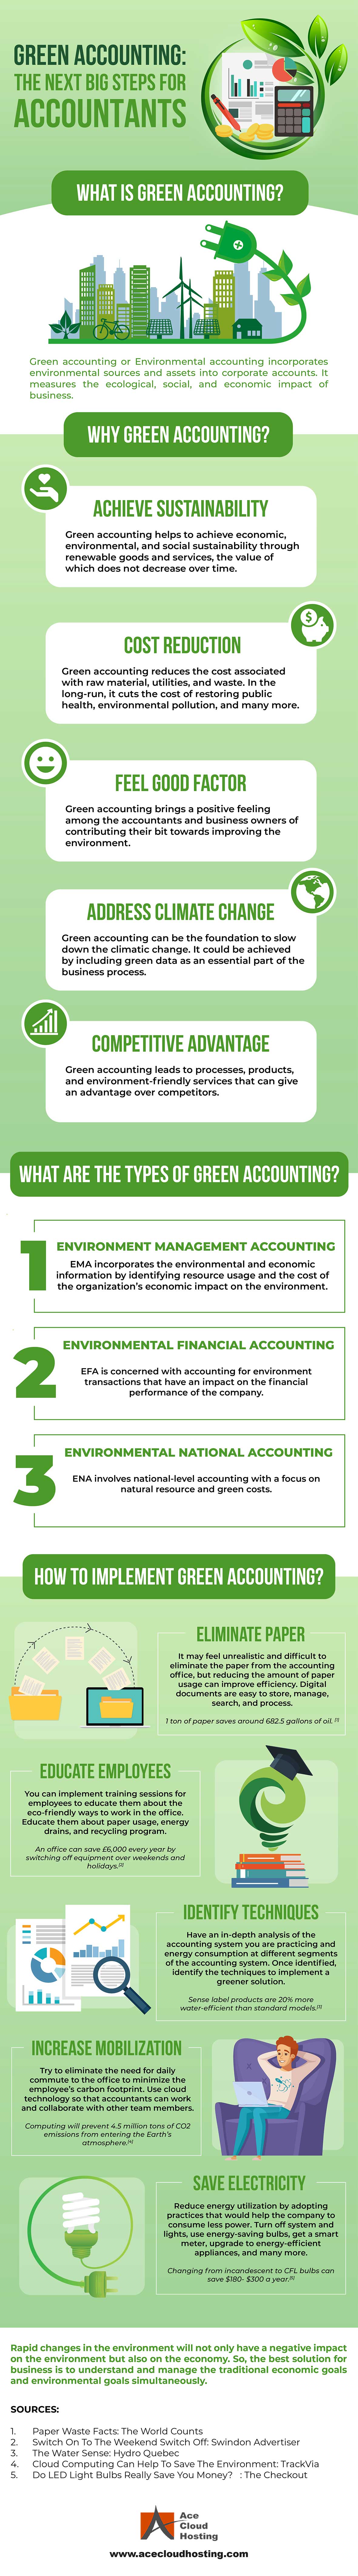 Green Accounting The Next Big Step for Accountants